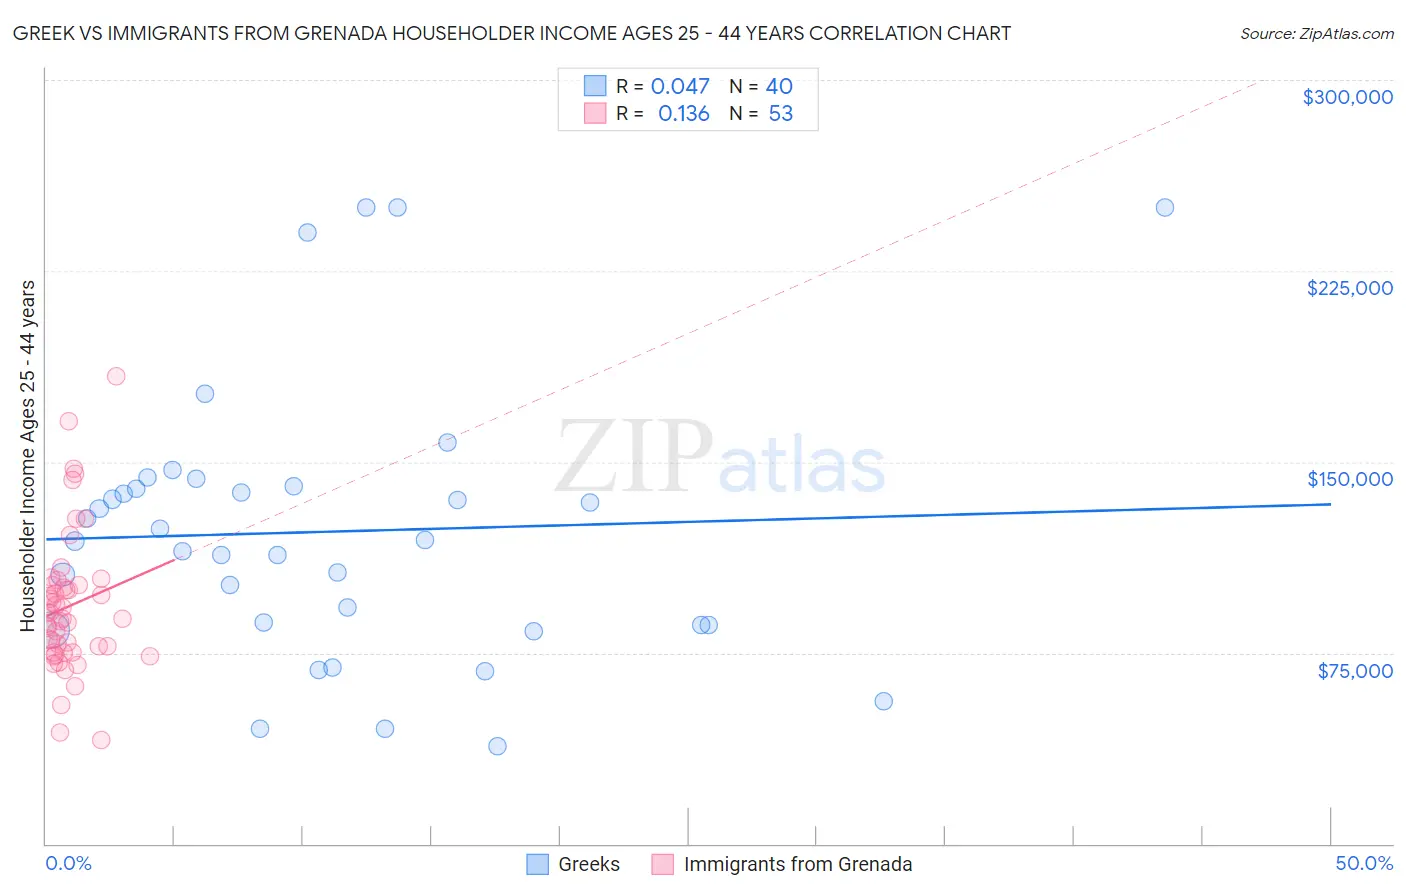 Greek vs Immigrants from Grenada Householder Income Ages 25 - 44 years